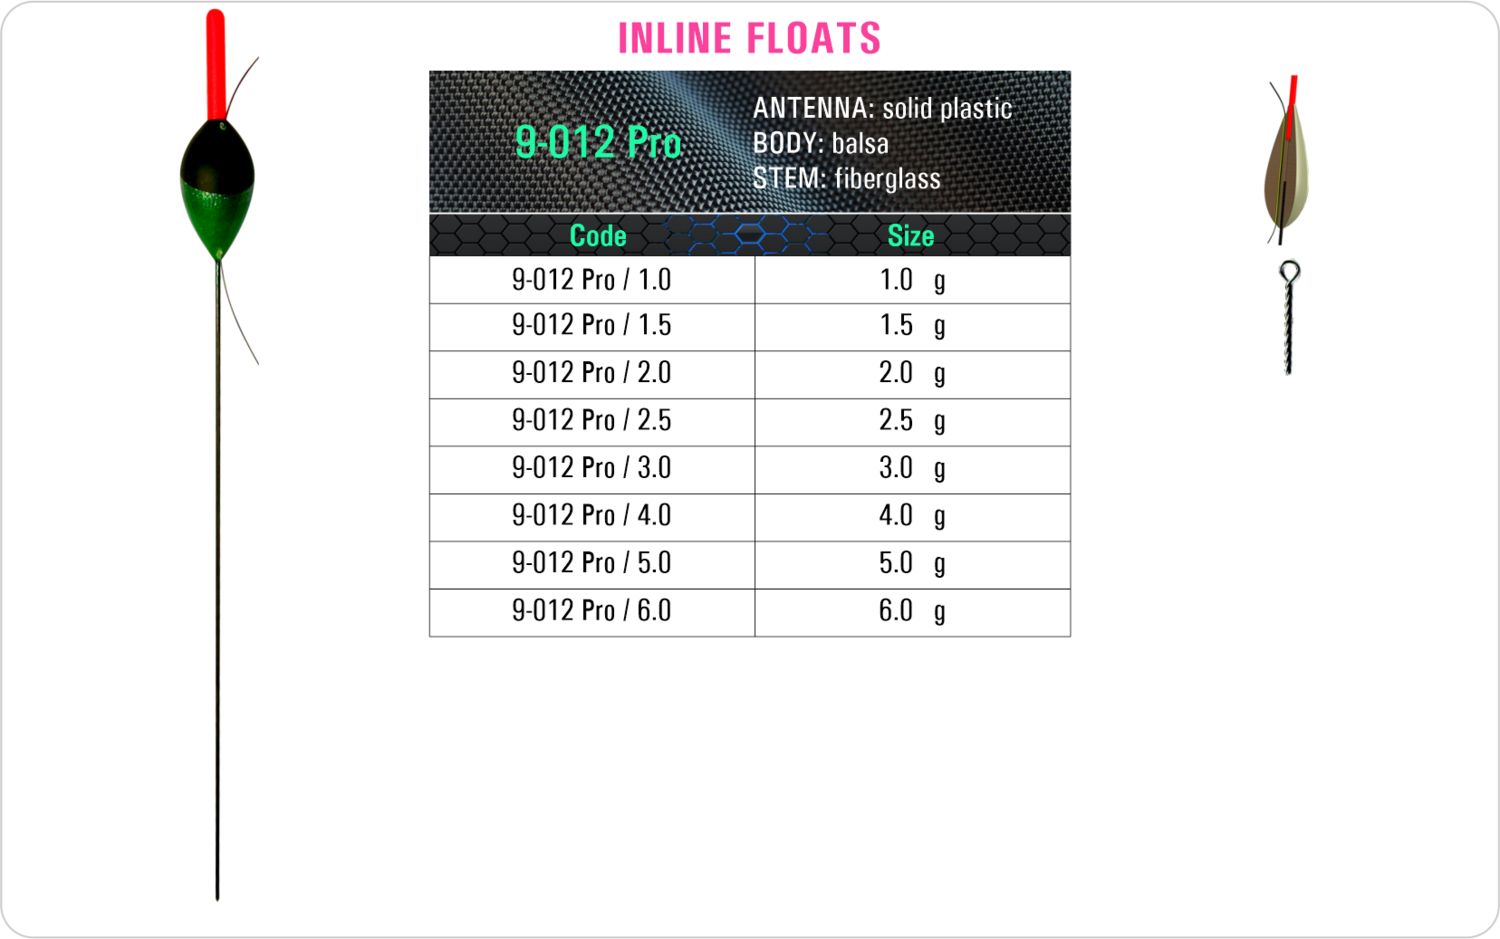 SF 9-012 Pro - Lake and river float model and table containing an additional information about this float with different codes, sizes, types of the body, the stem and the antenna of the float.